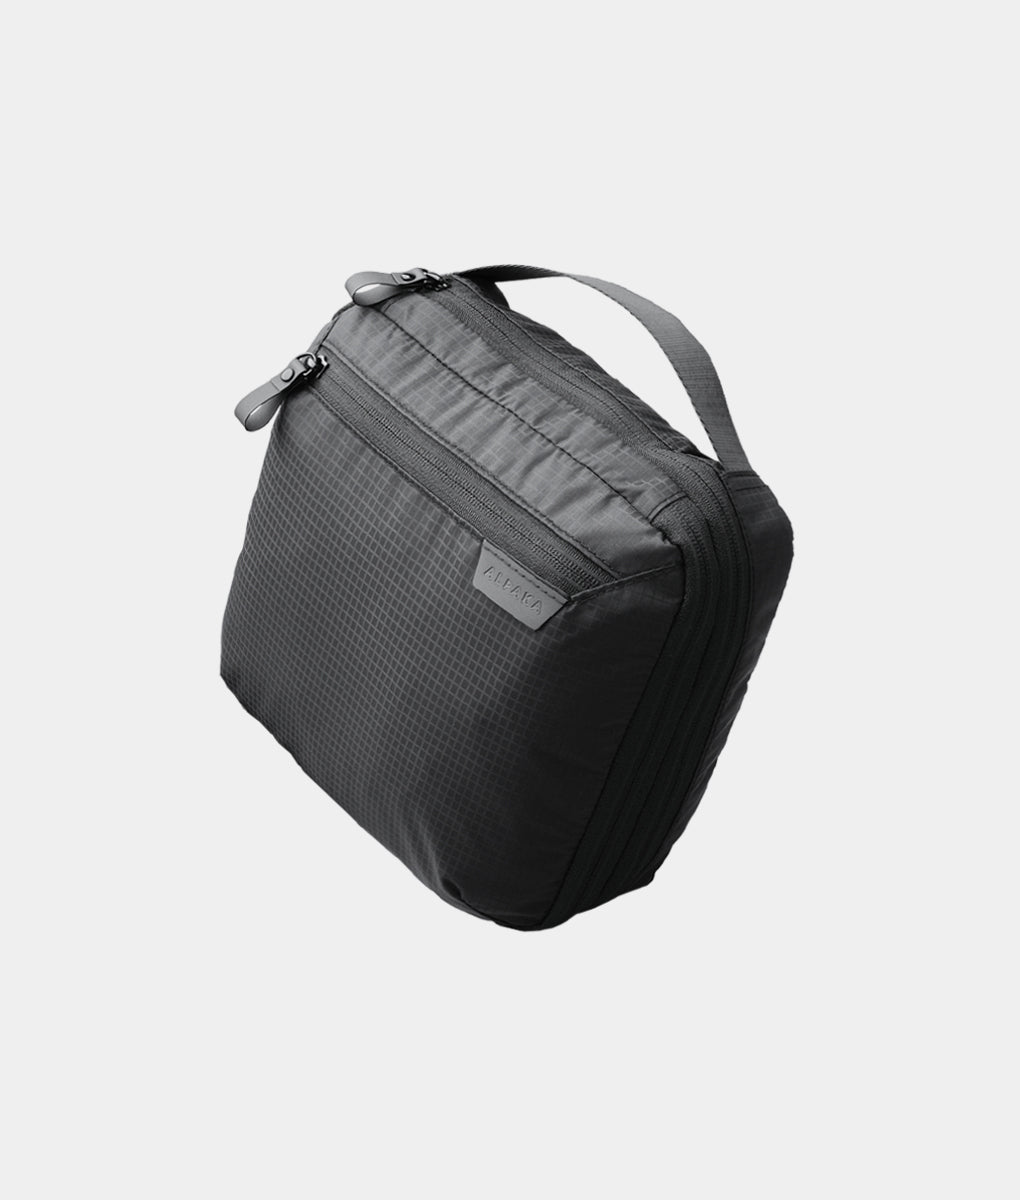 This Travel Backpack Comes With Packing Cubes